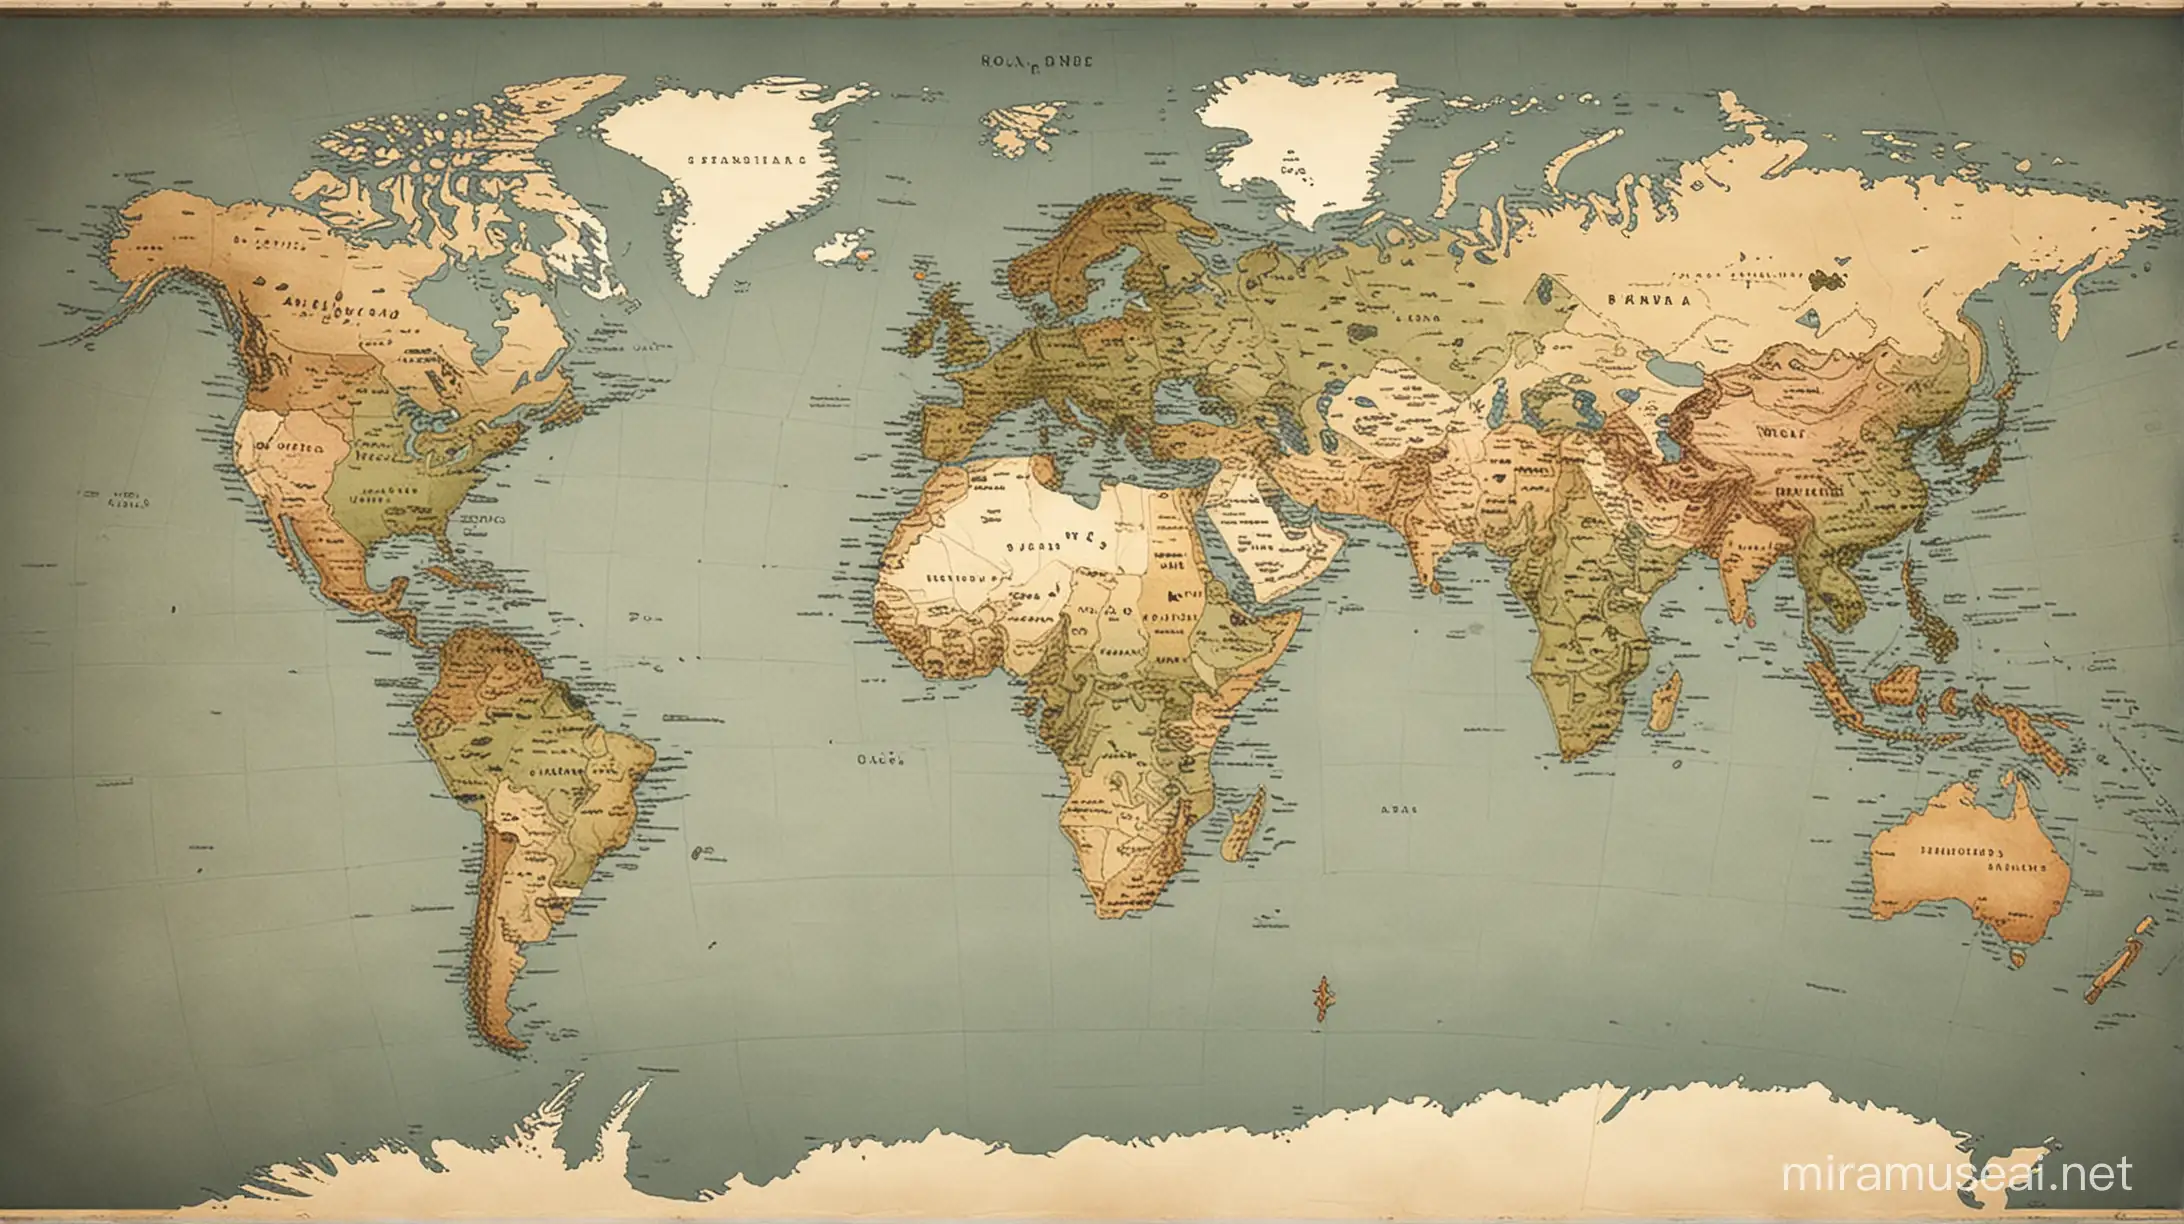 Enigmatic Continent Amongst Four Known Continents on World Map